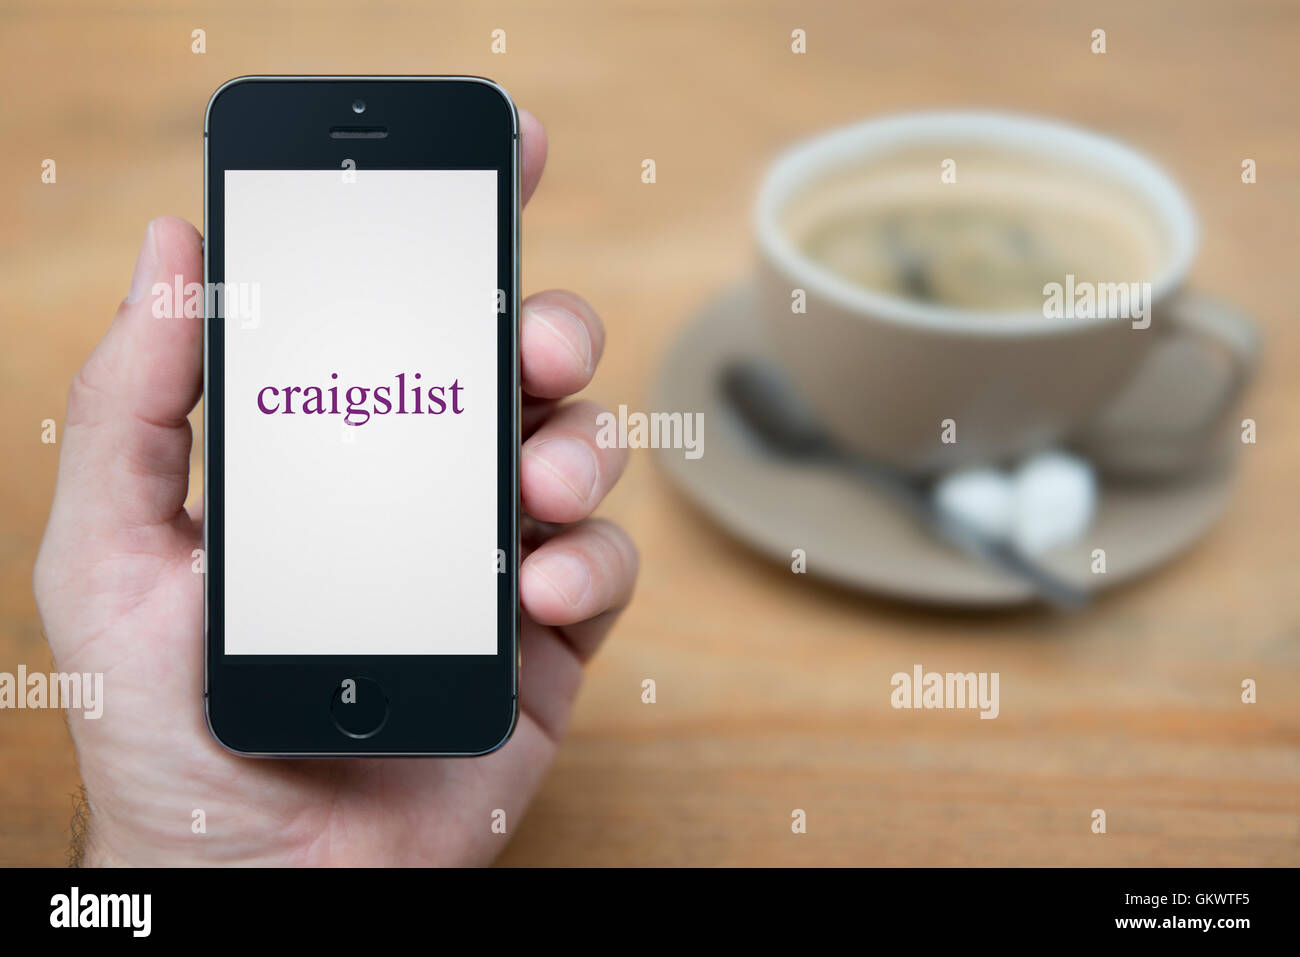 A man looks at his iPhone which displays the Craigslist logo, while sat with a cup of coffee (Editorial use only). Stock Photo